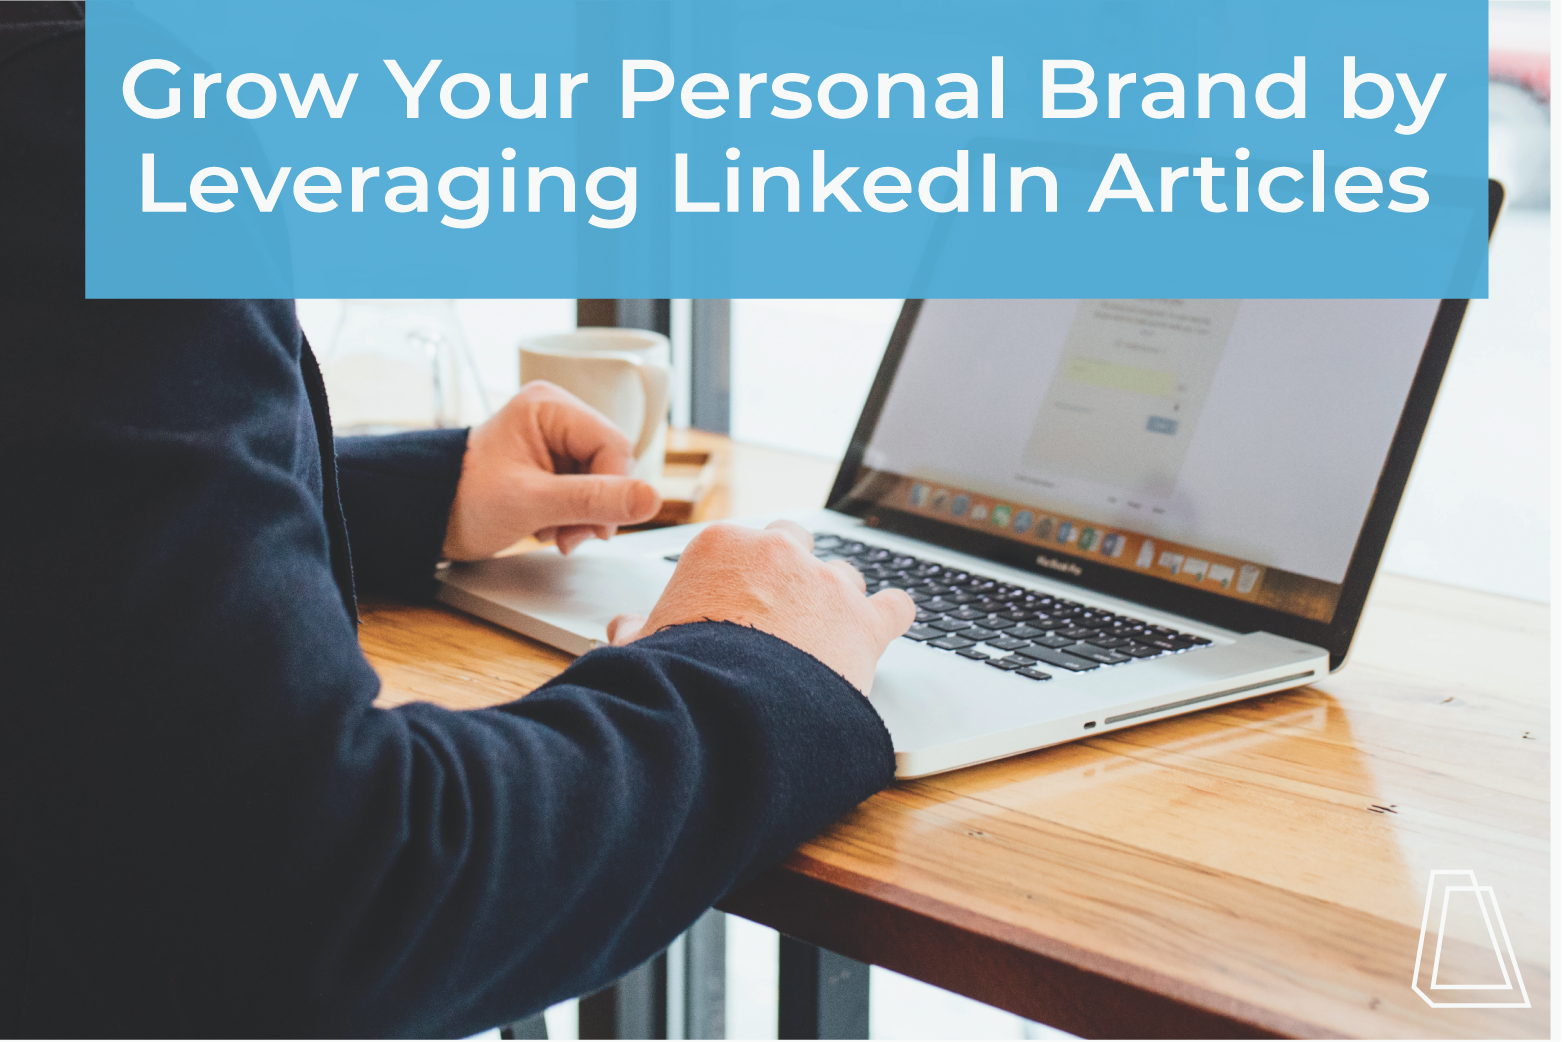 How to Write LinkedIn Articles that Grow Your Personal Brand and